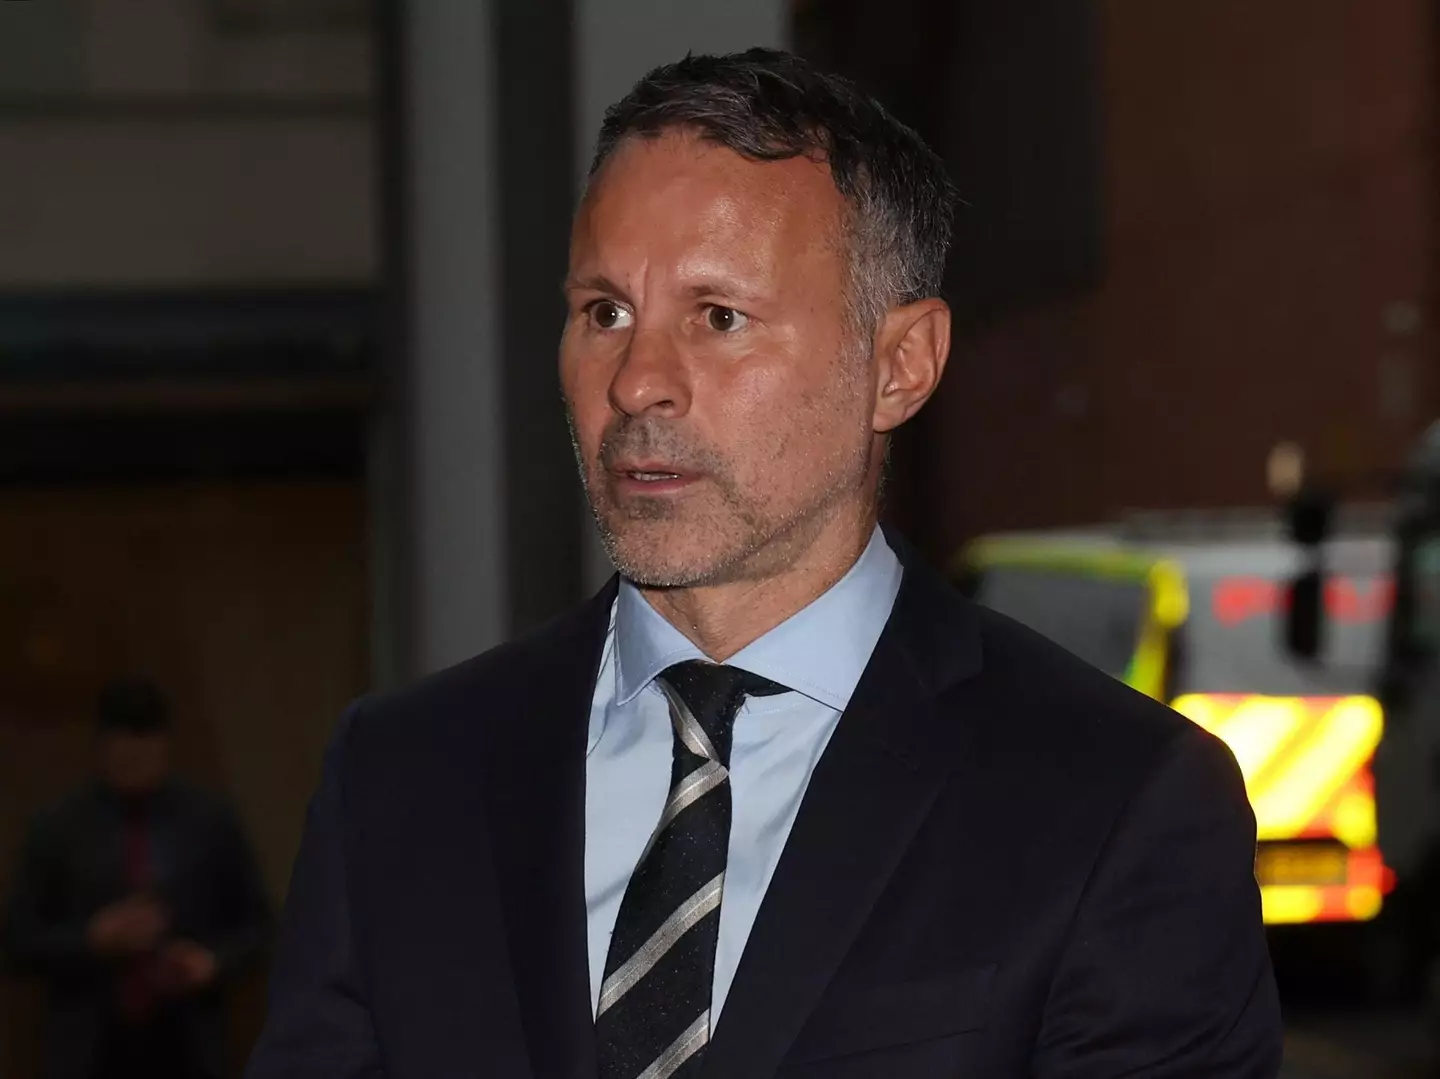 The jury at Manchester Crown Court was unable to deliver a verdict on any of the chargers against Giggs (Image: Alamy)